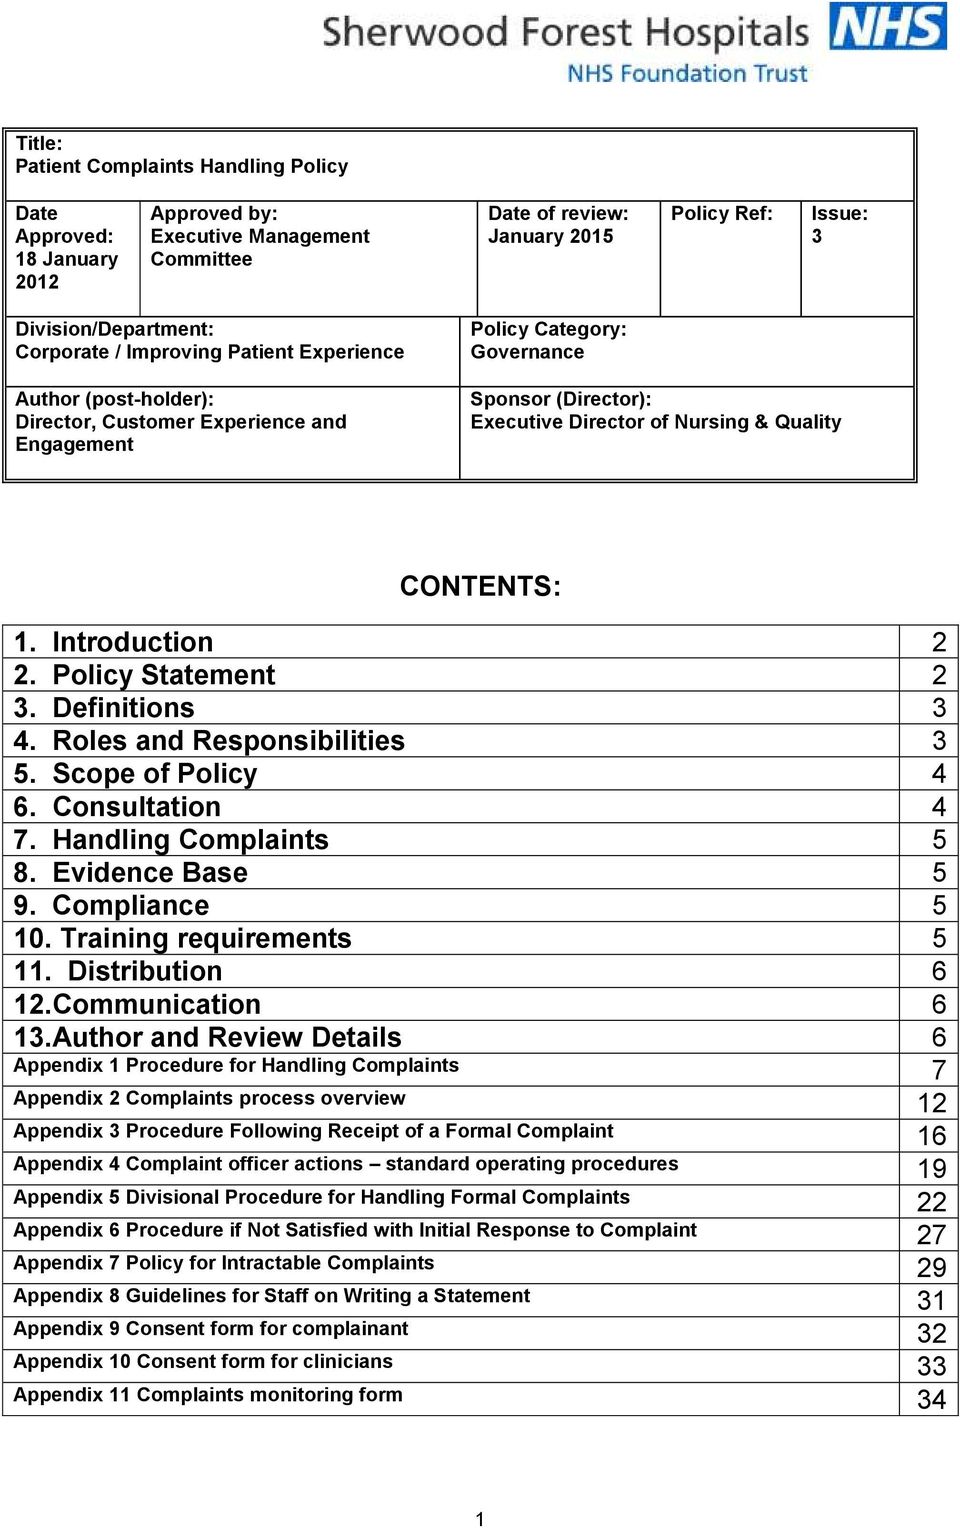 Introduction 2 2. Policy Statement 2 3. Definitions 3 4. Roles and Responsibilities 3 5. Scope of Policy 4 6. Consultation 4 7. Handling Complaints 5 8. Evidence Base 5 9. Compliance 5 10.